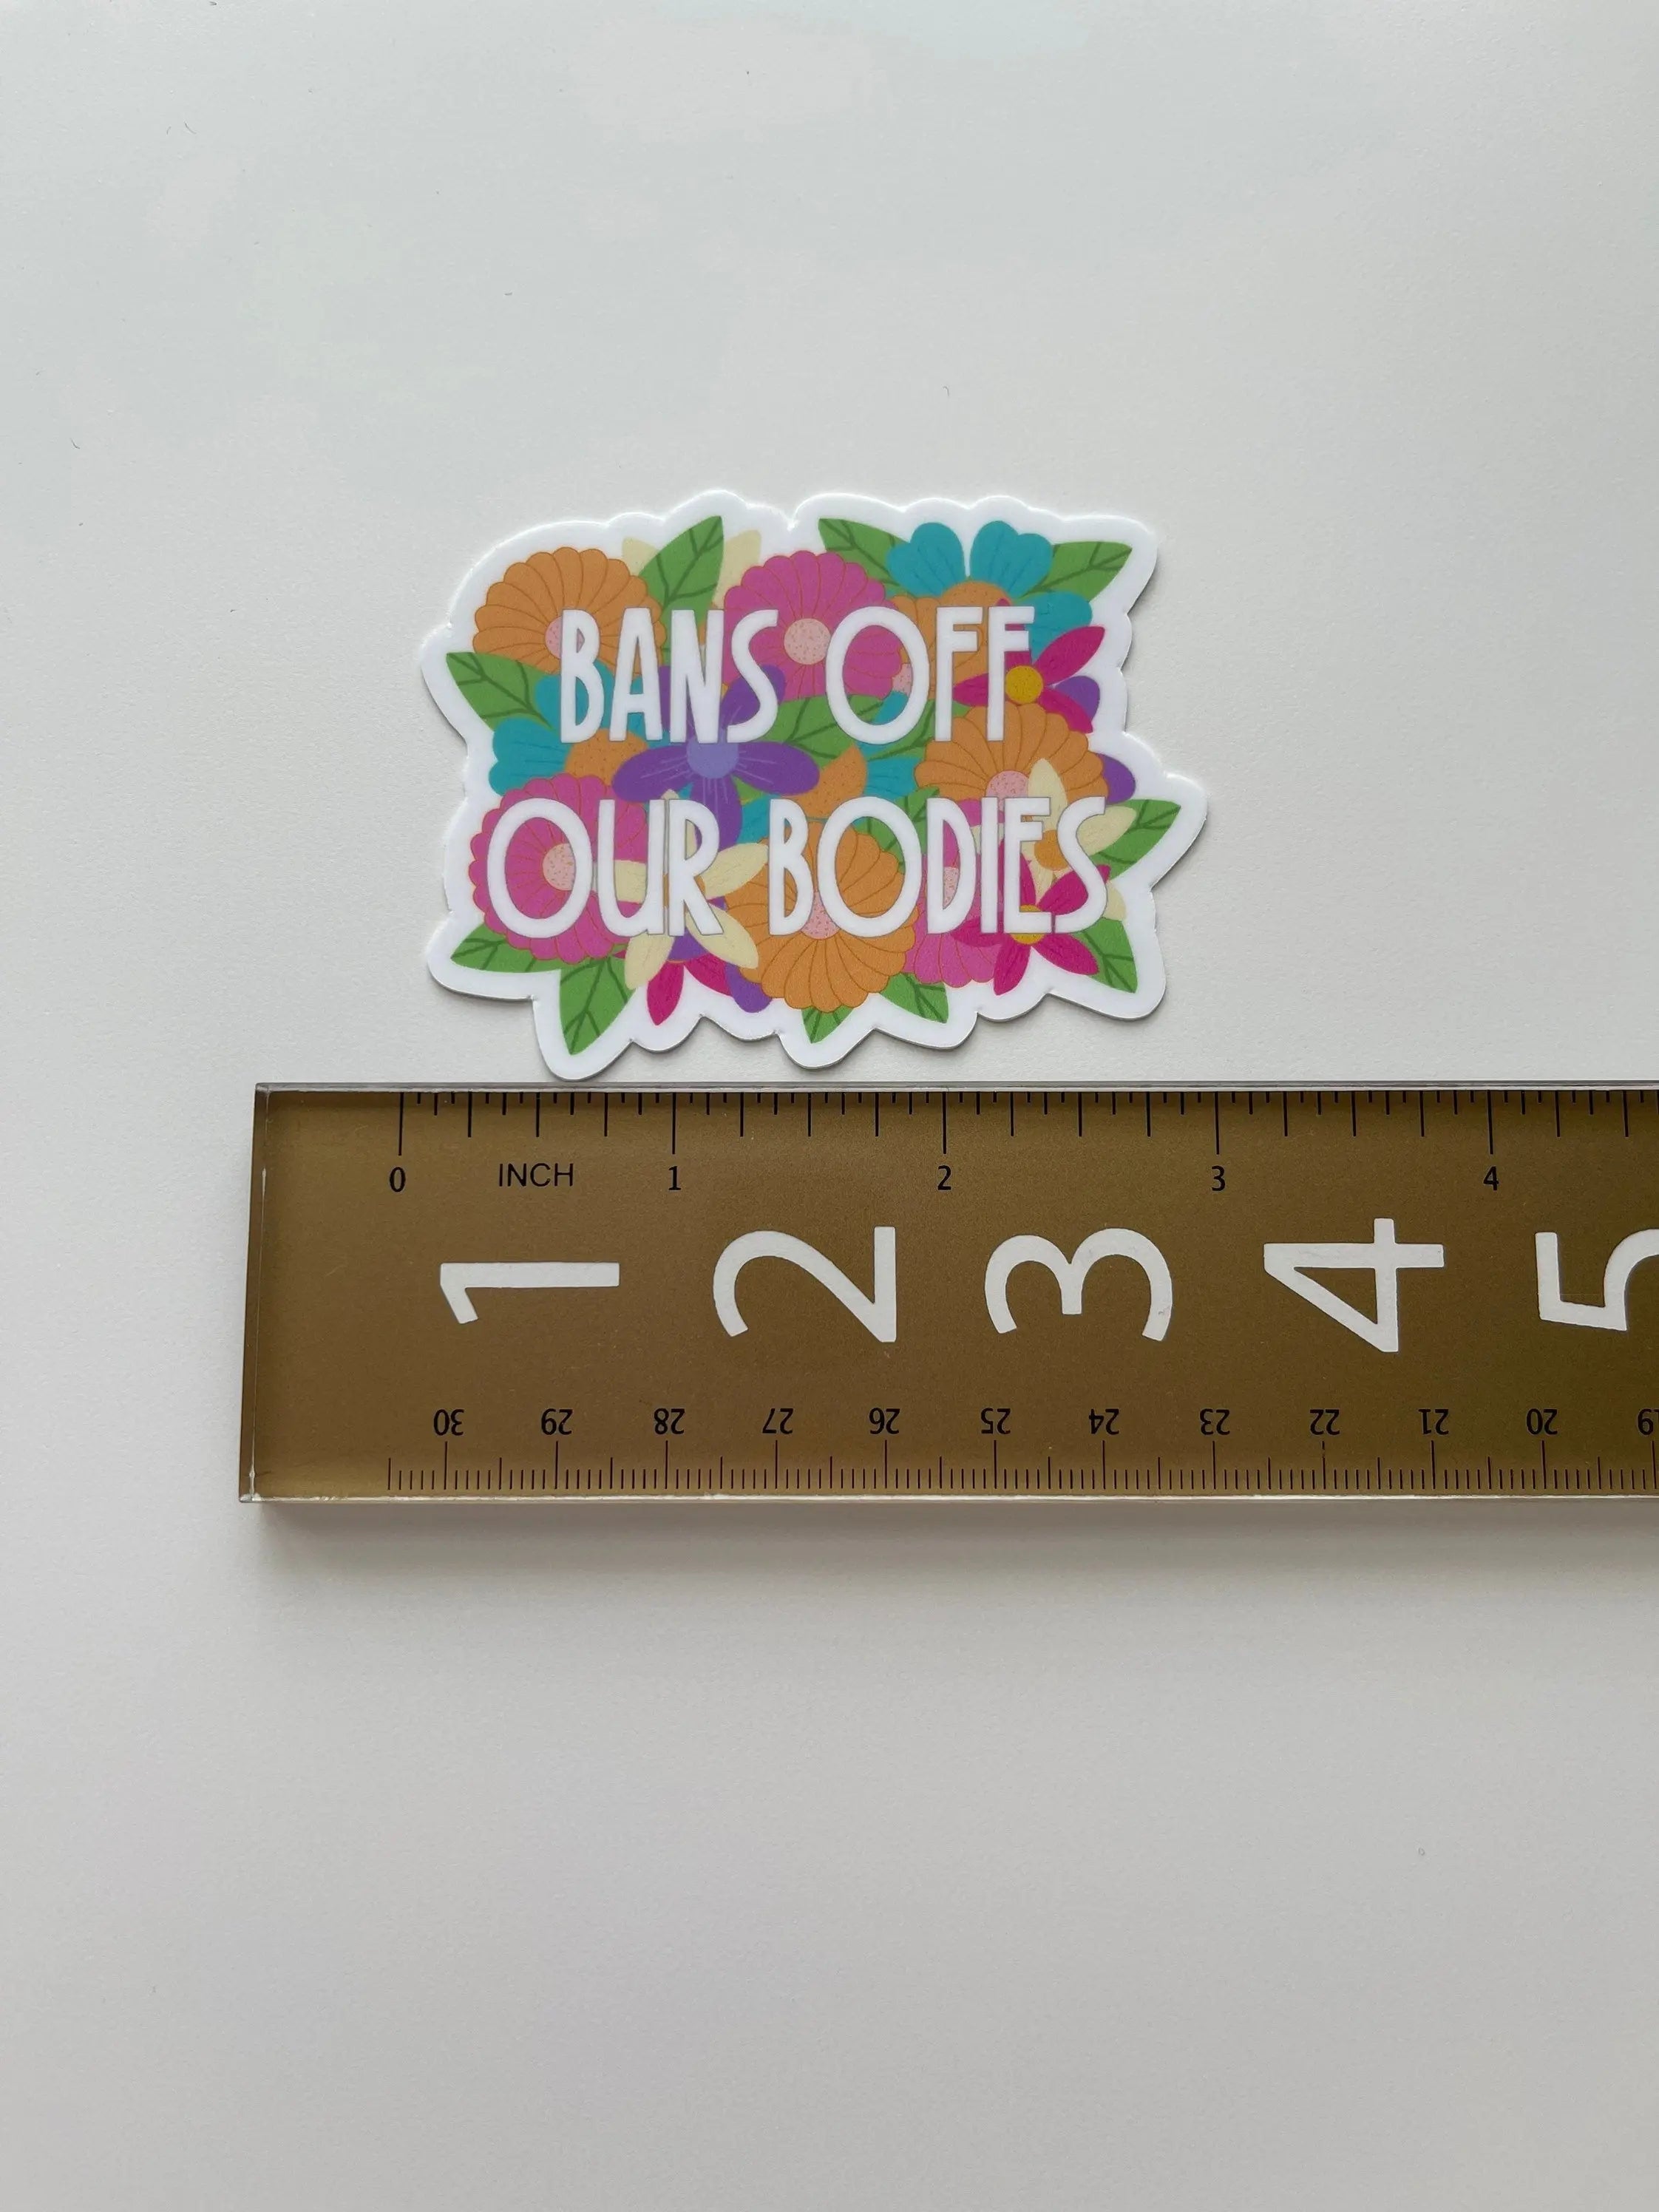 Bans Off Our Bodies sticker MangoIllustrated